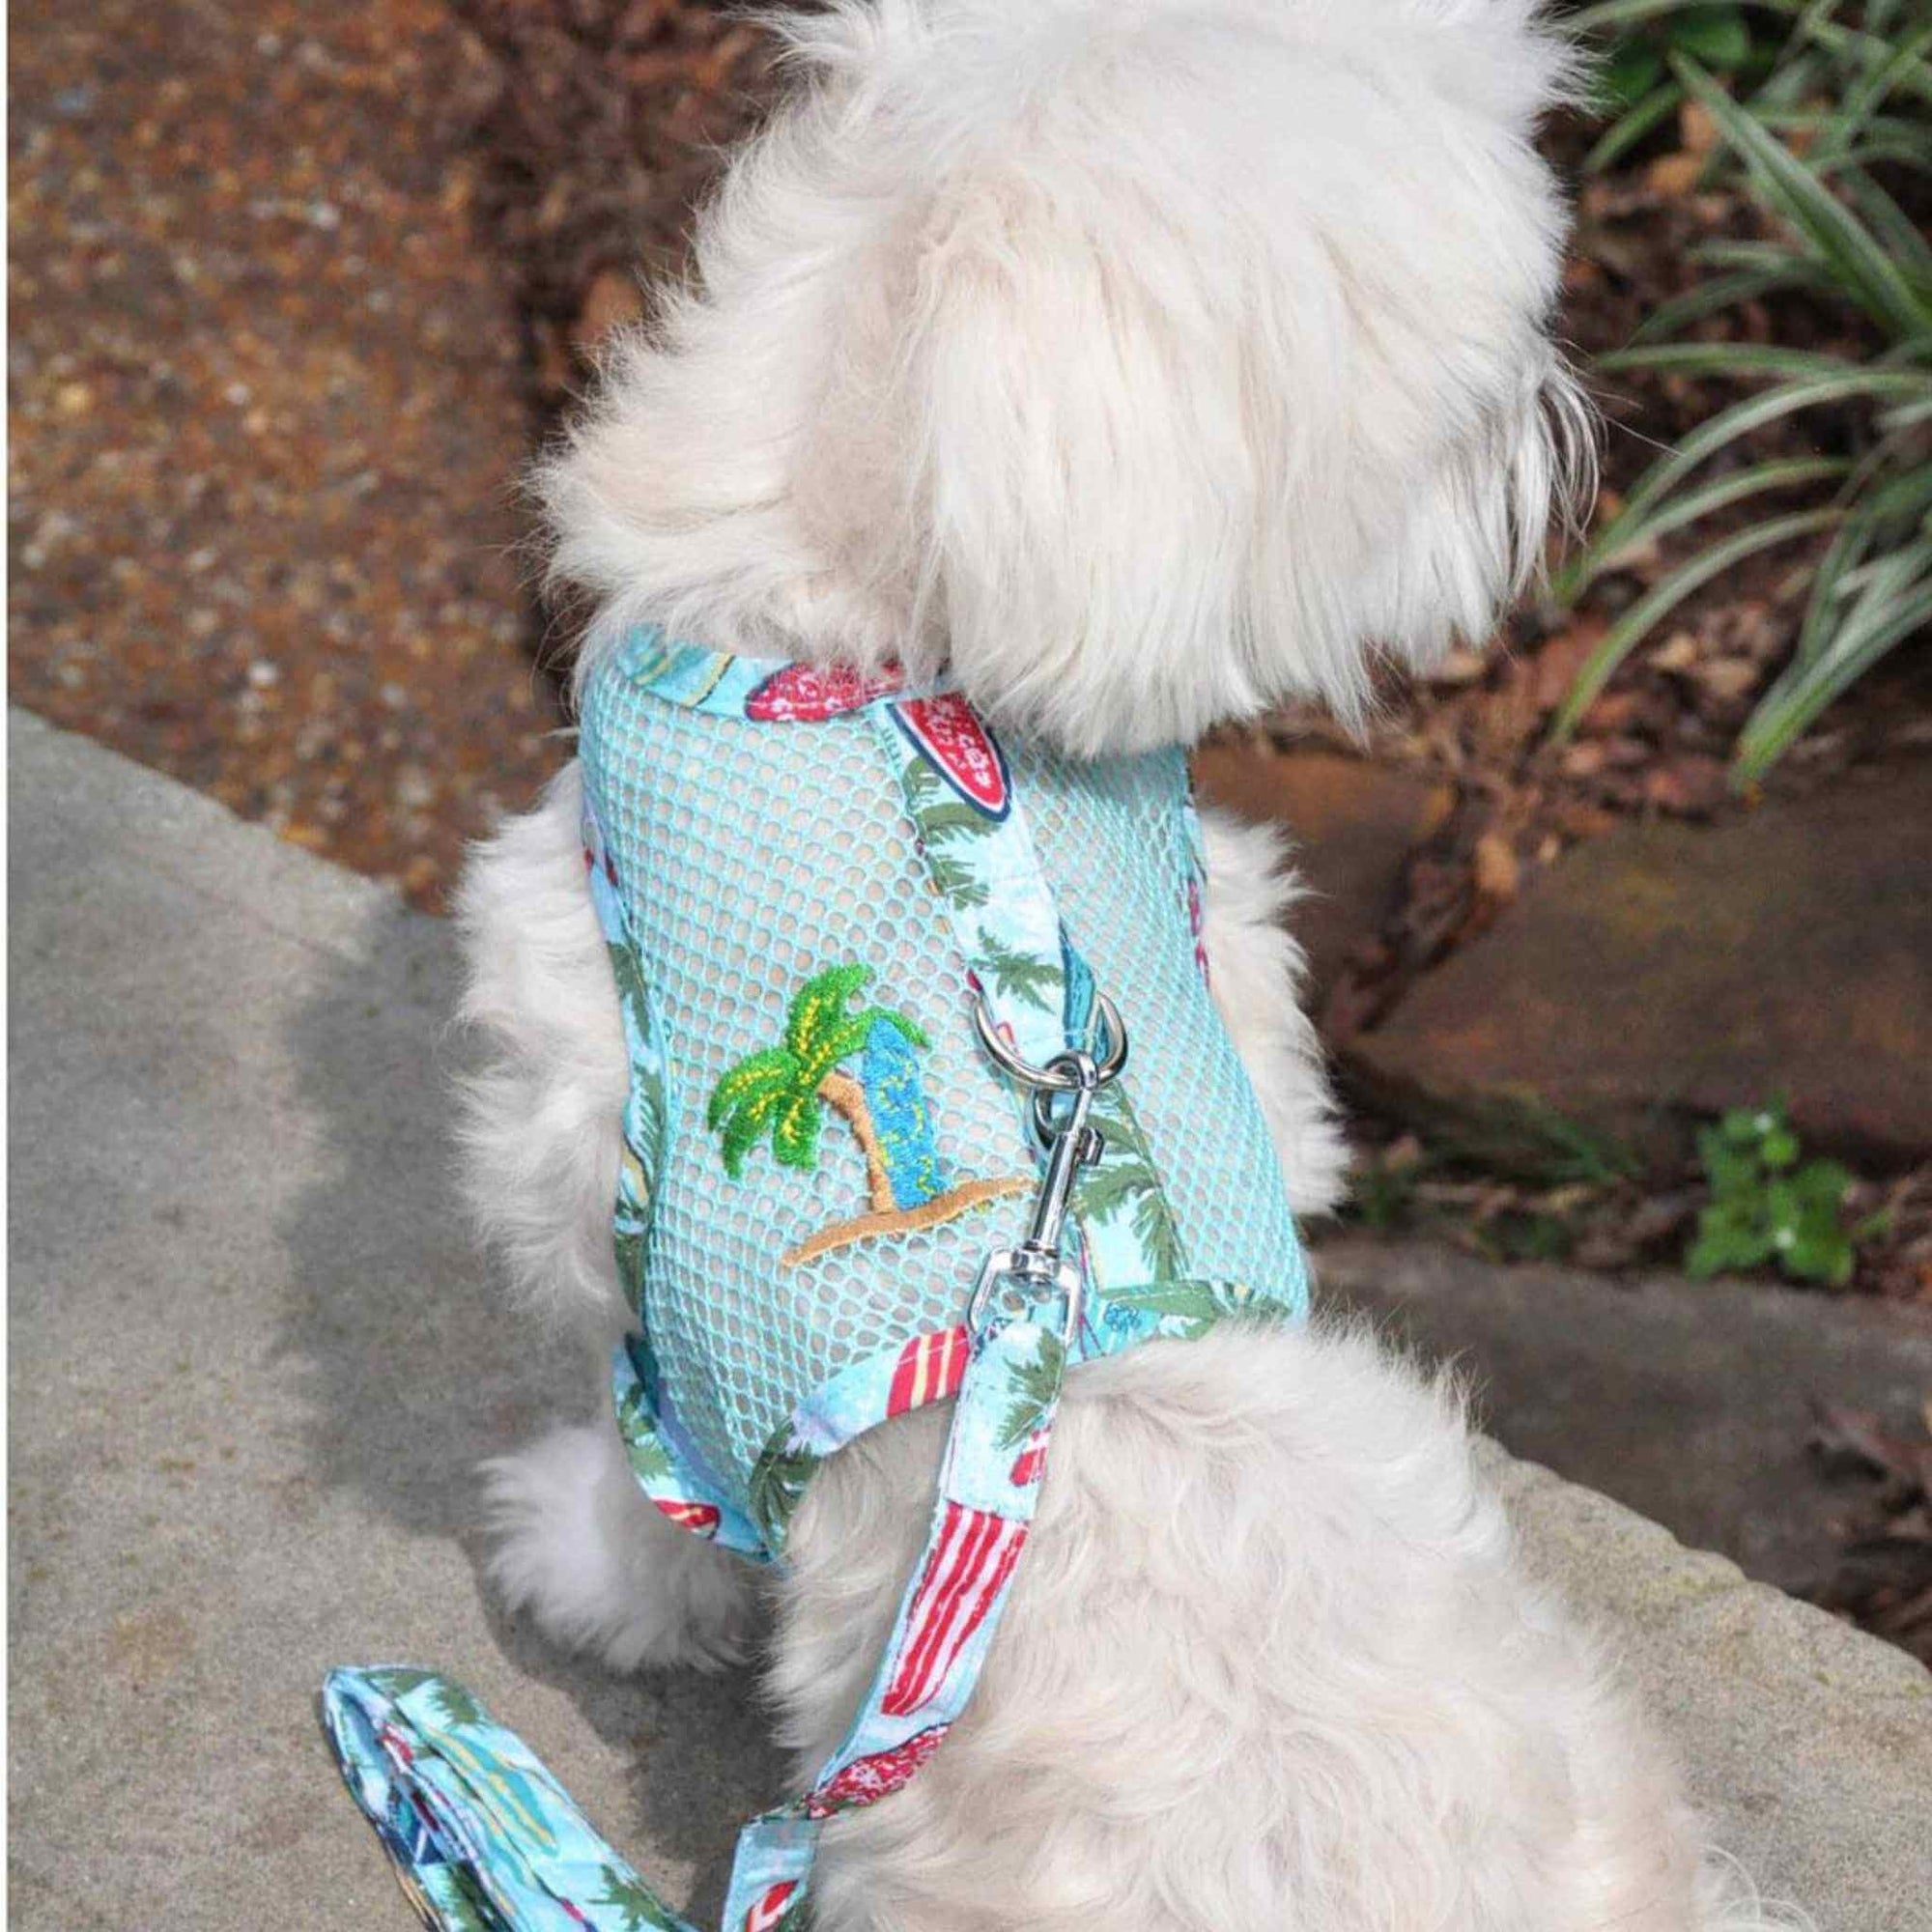 Cool Mesh Dog Harness - Surfboards and Palms on a white dog